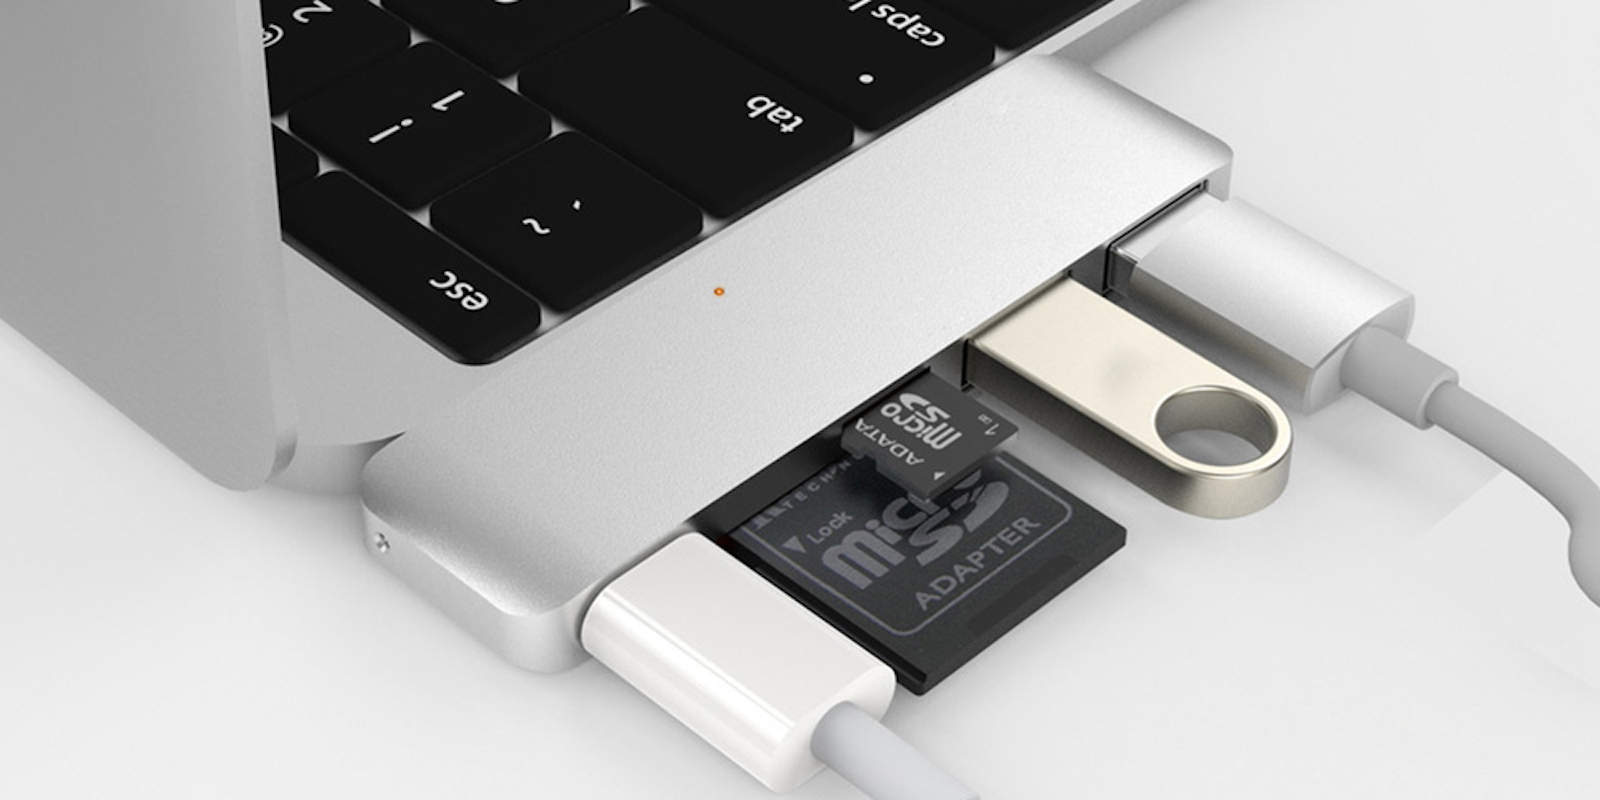 Don't let the MacBook's USB-C ports slow you down, regain your favorite formats with this simple solution.